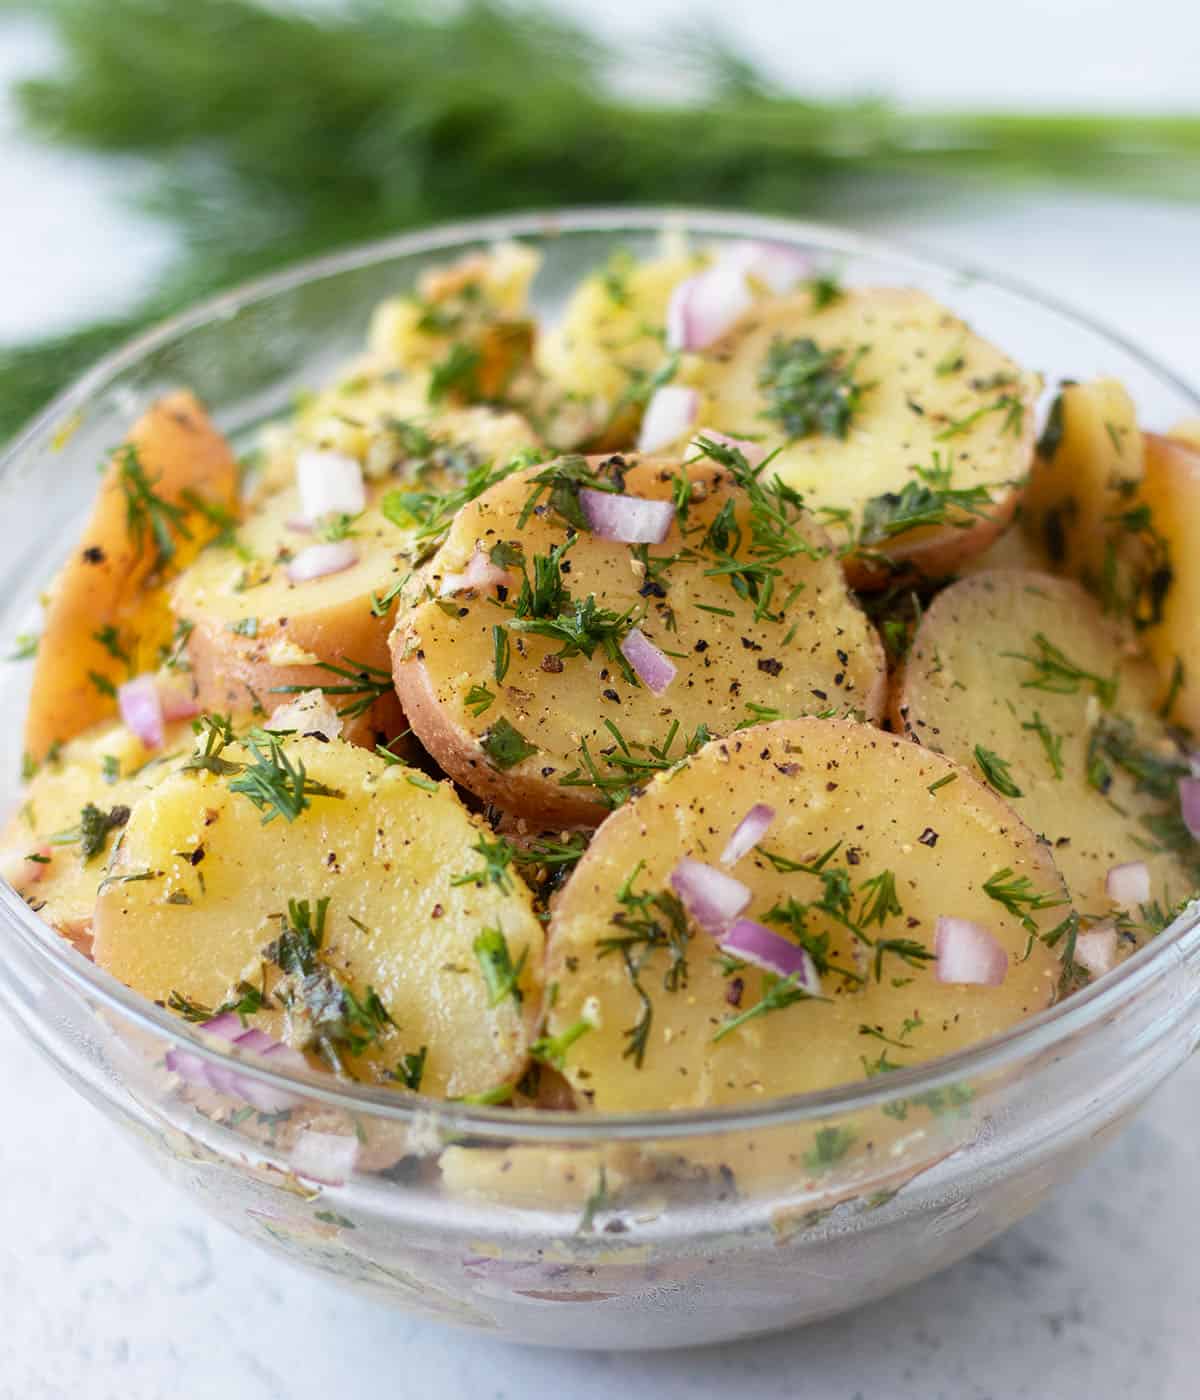 dill potato salad in a clear glass serving bowl topped with fresh chopped dill weed.